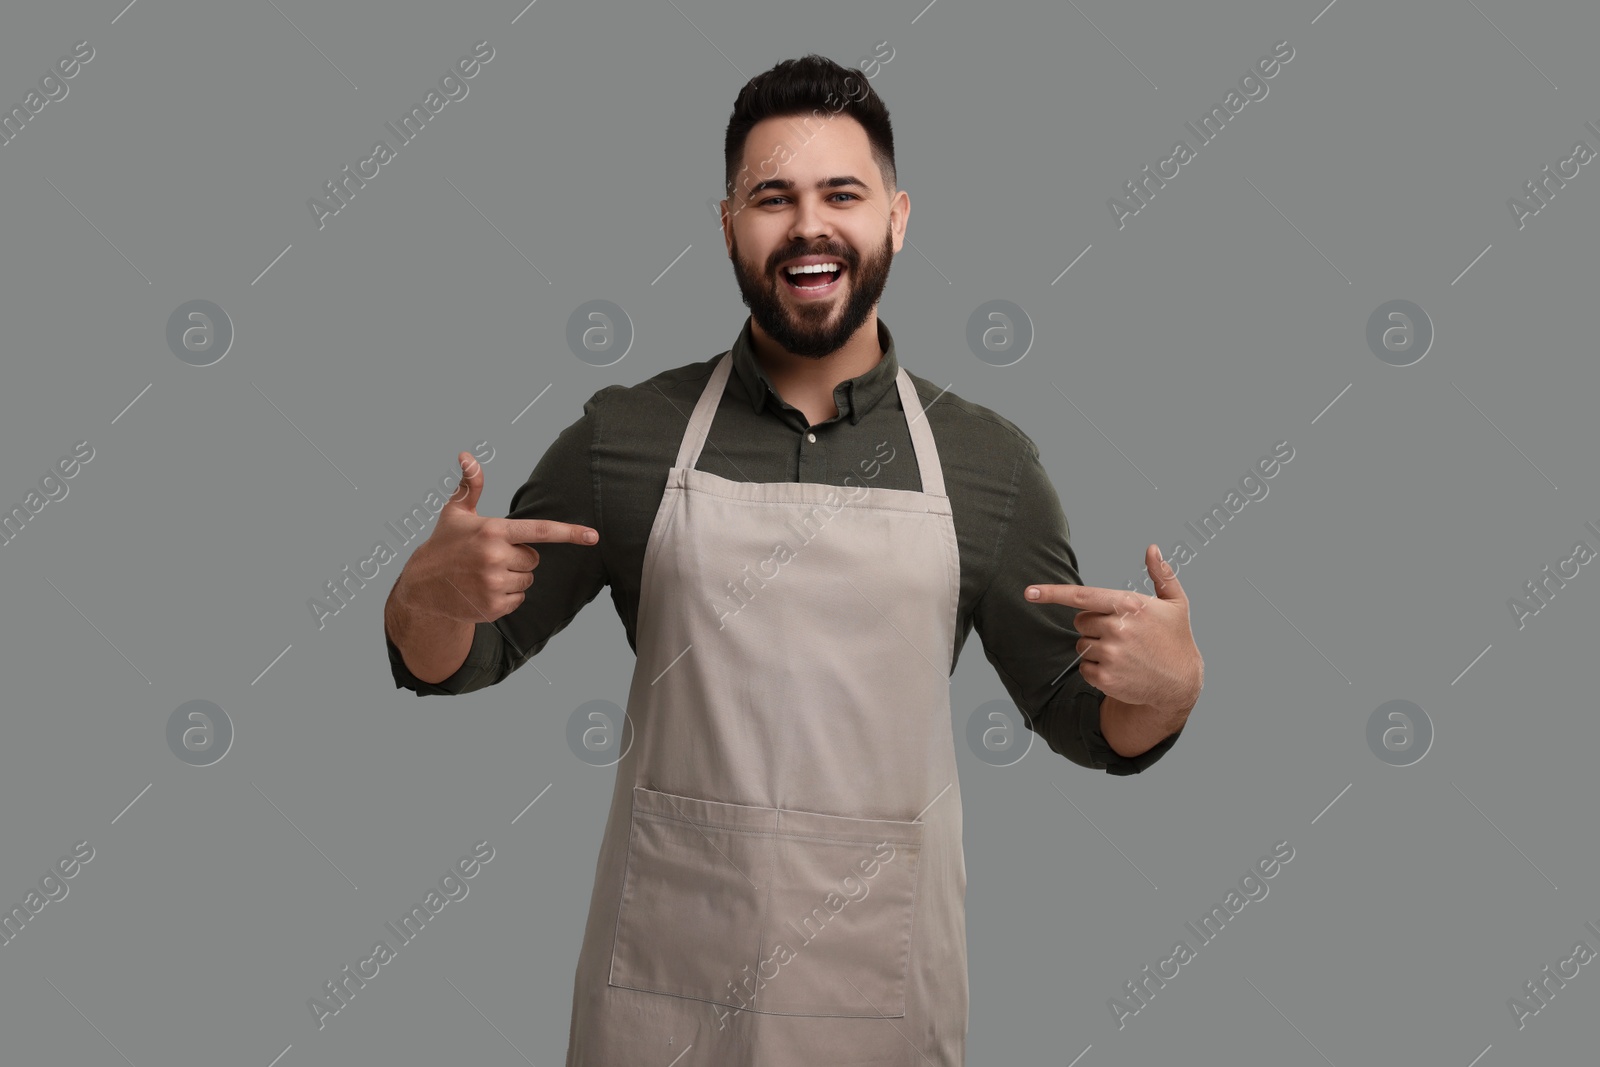 Photo of Happy man pointing at kitchen apron on grey background. Mockup for design